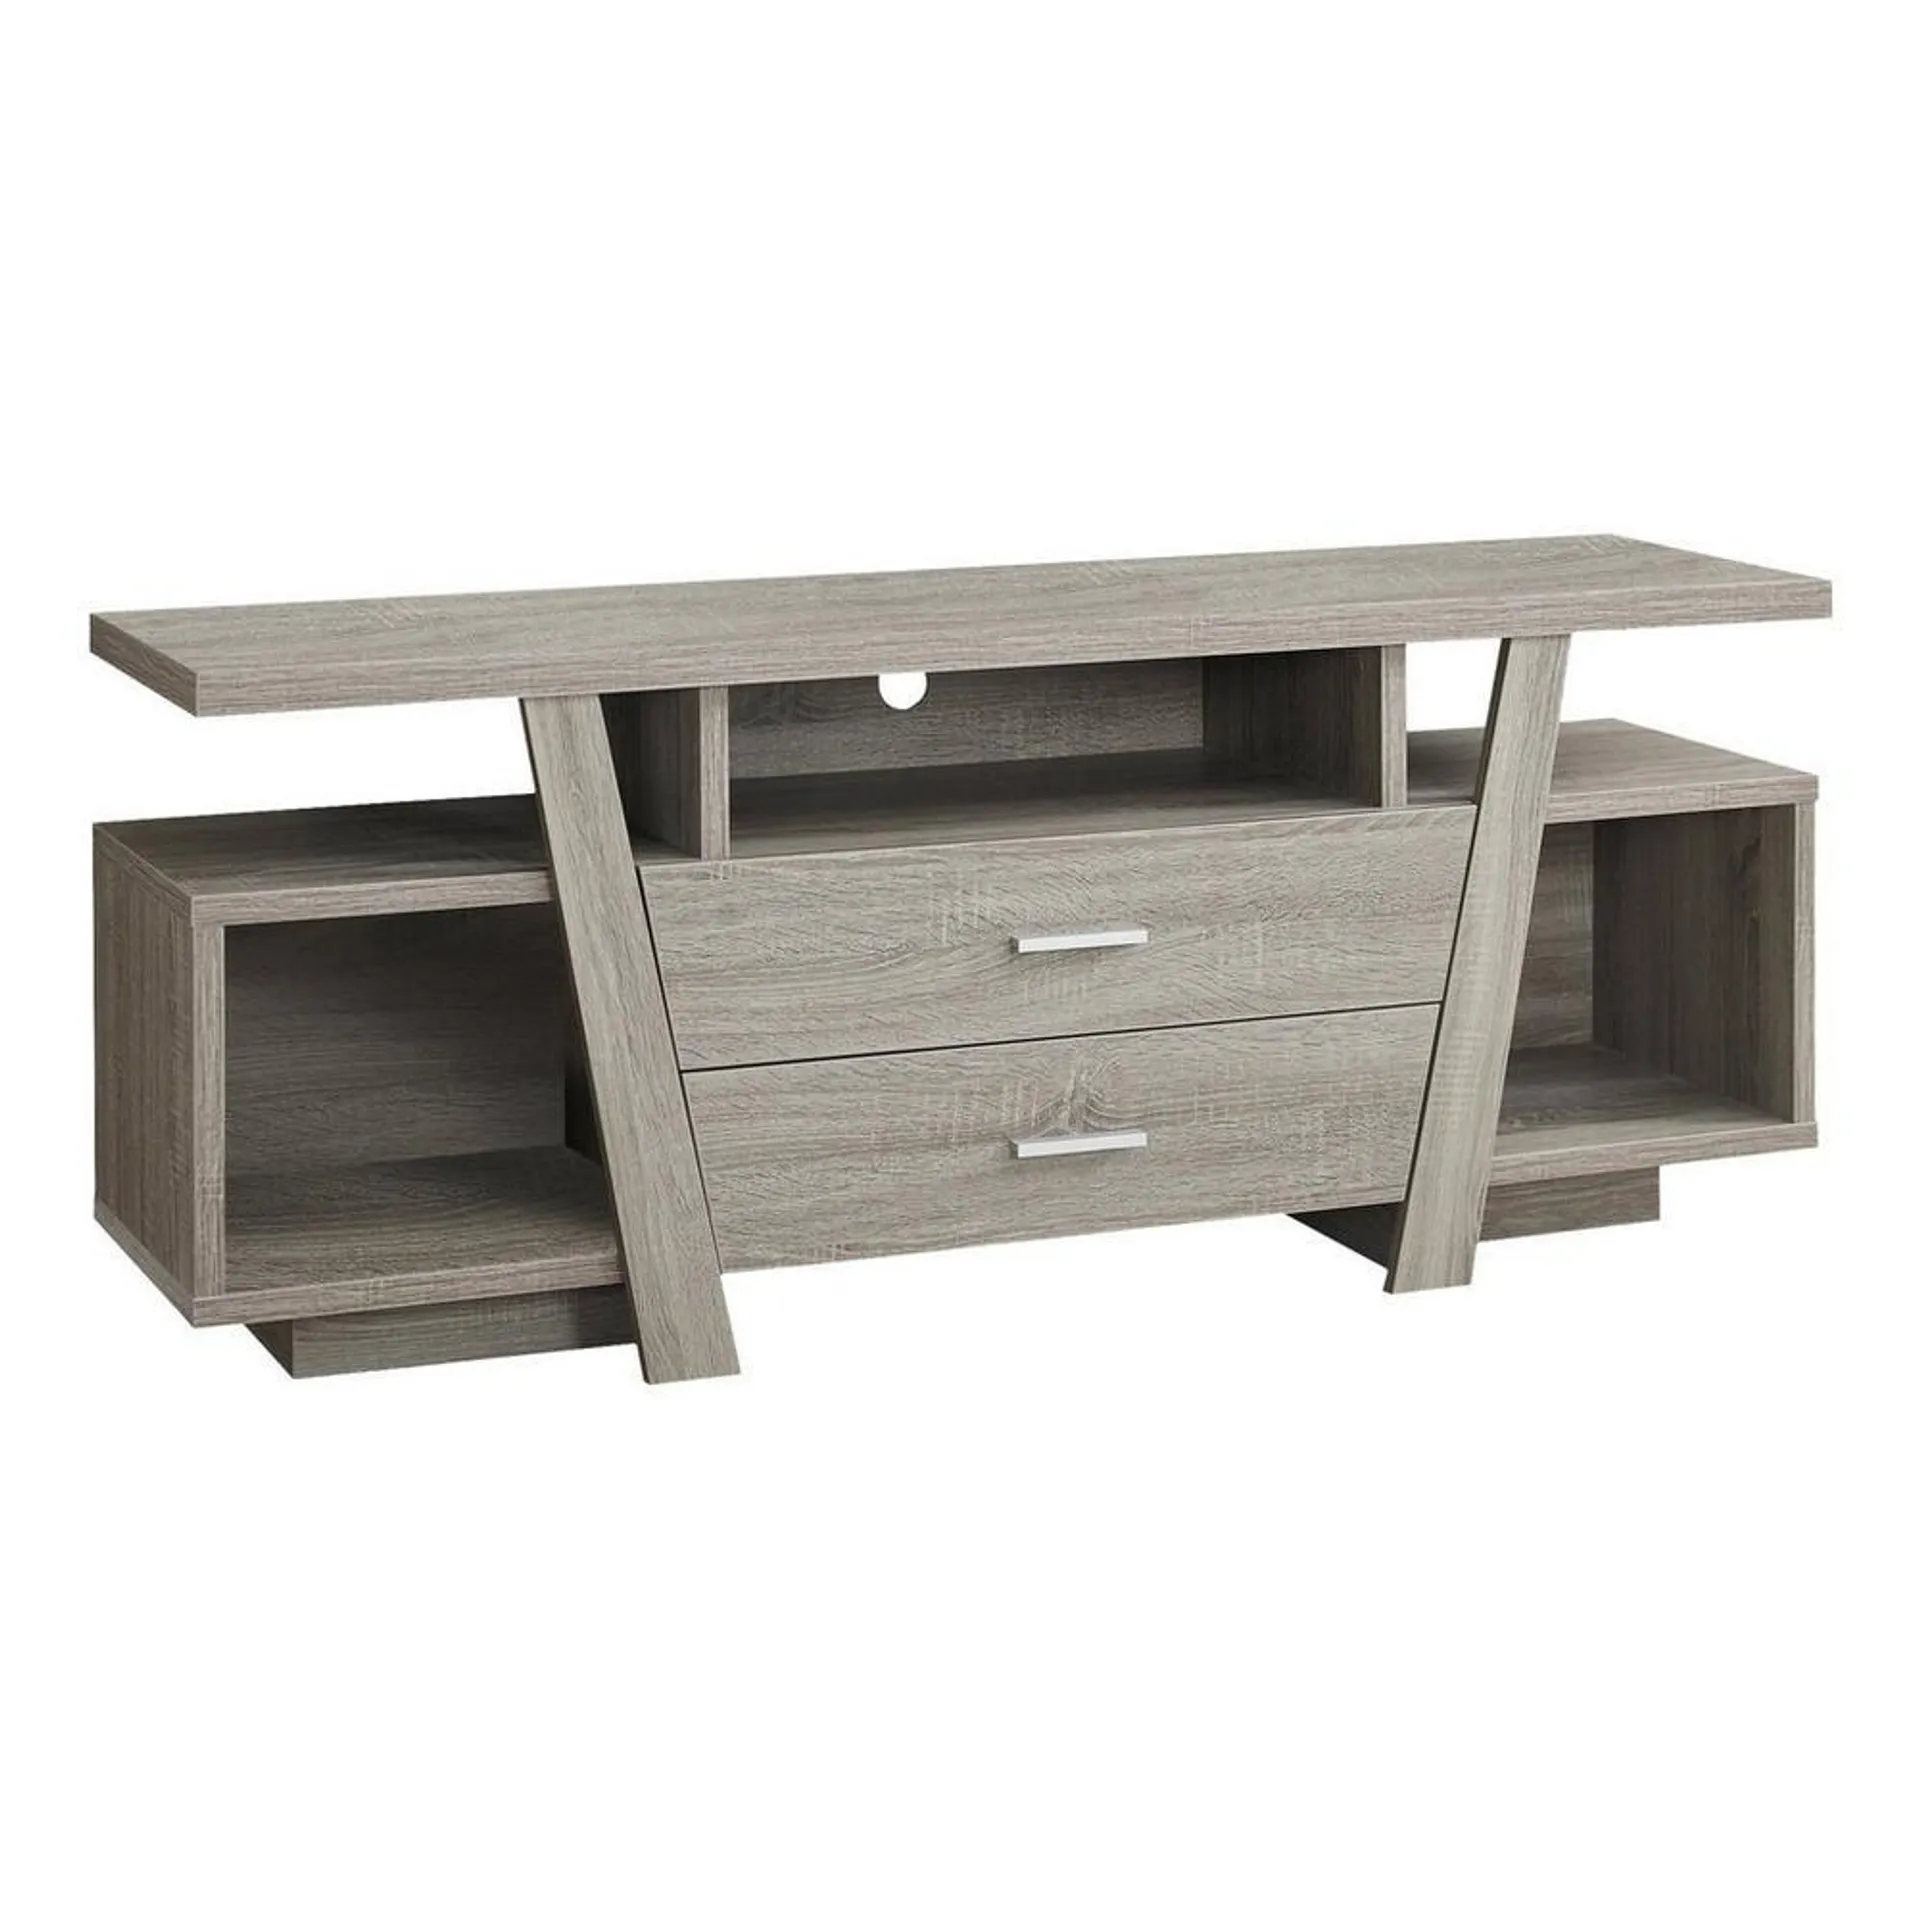 60" TV Stand with Drawers - Taupe